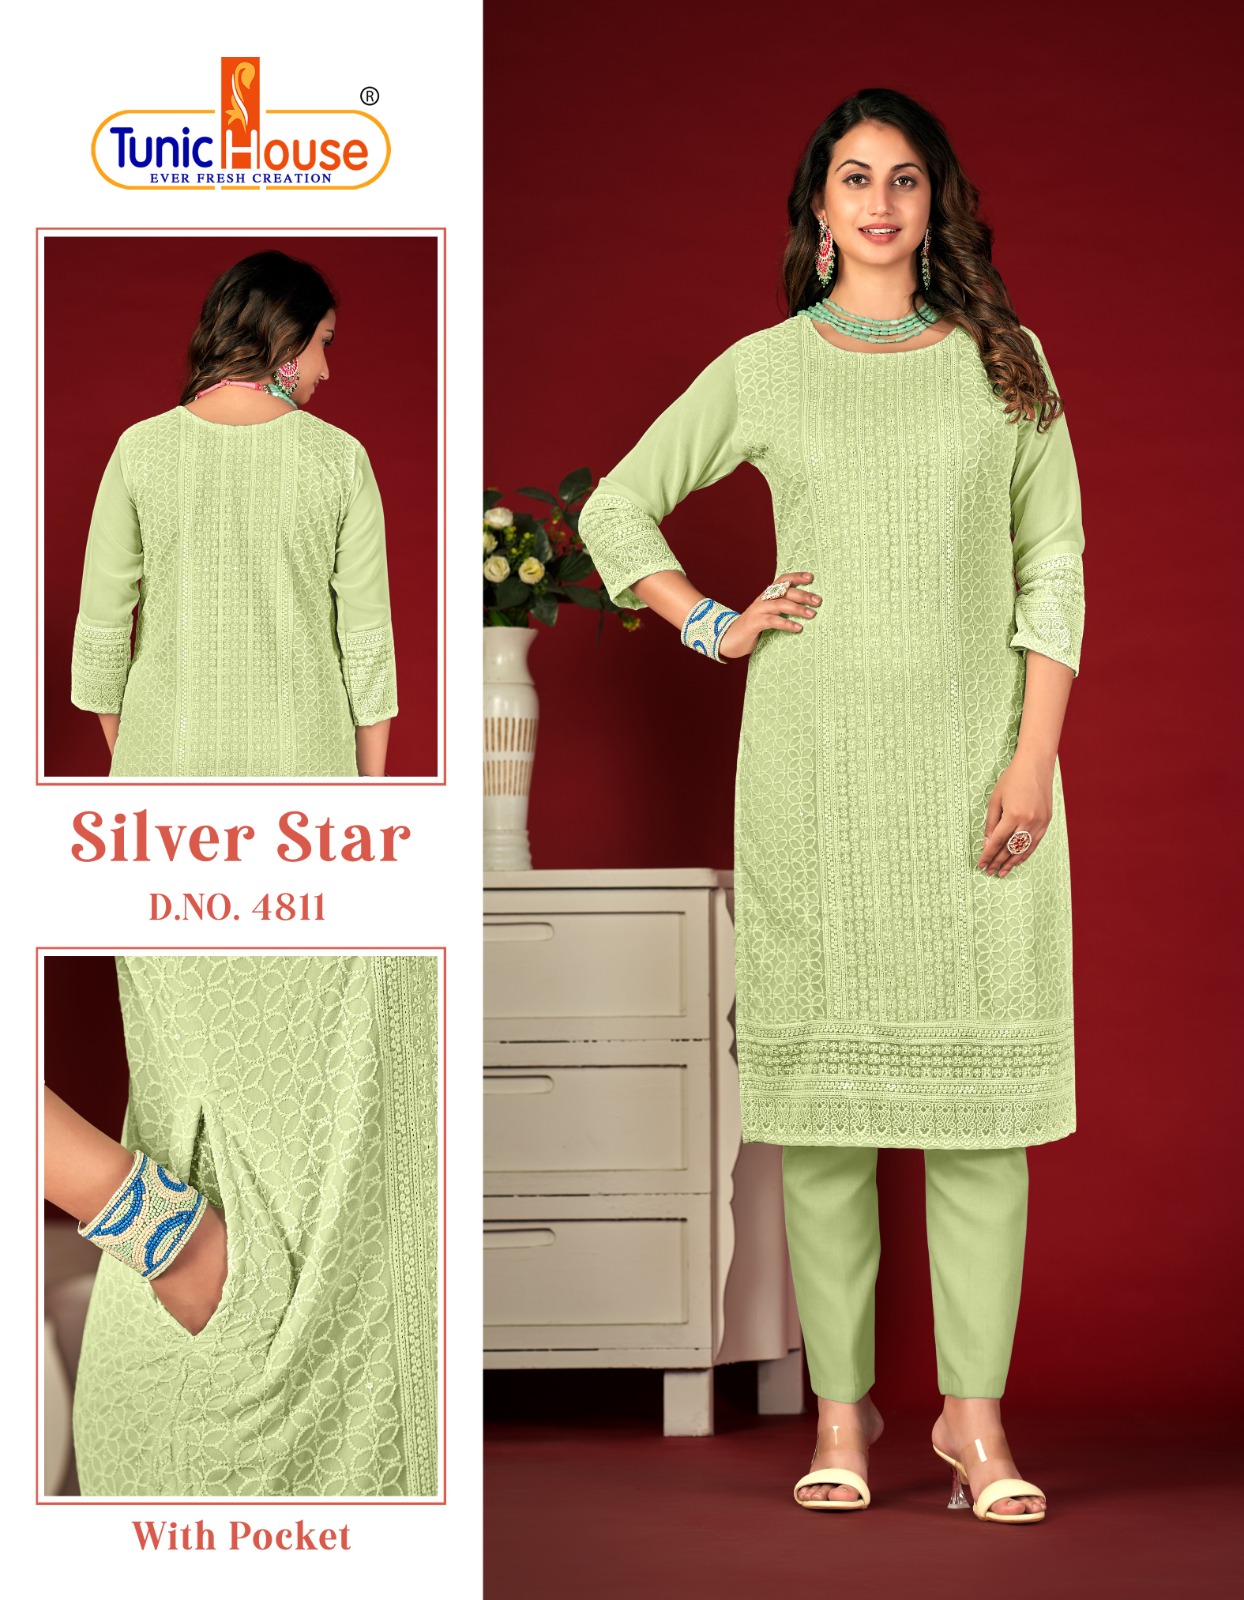 Tunic Houes Silver Star collection 4